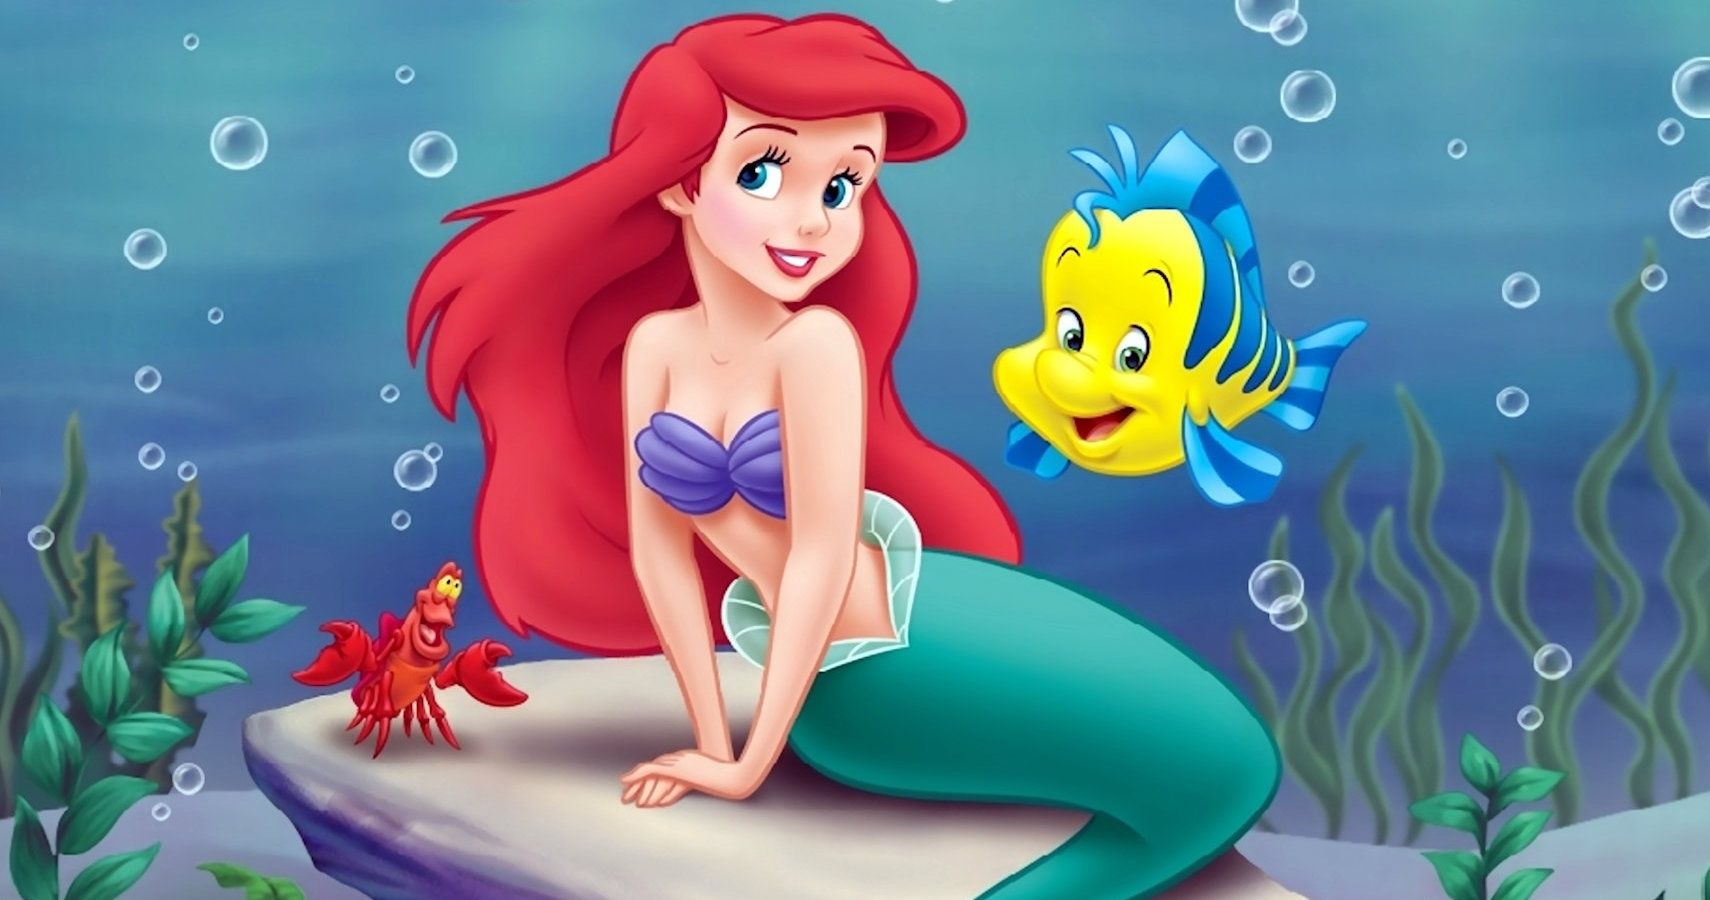 The Little Mermaid 10 Most Inspirational Quotes